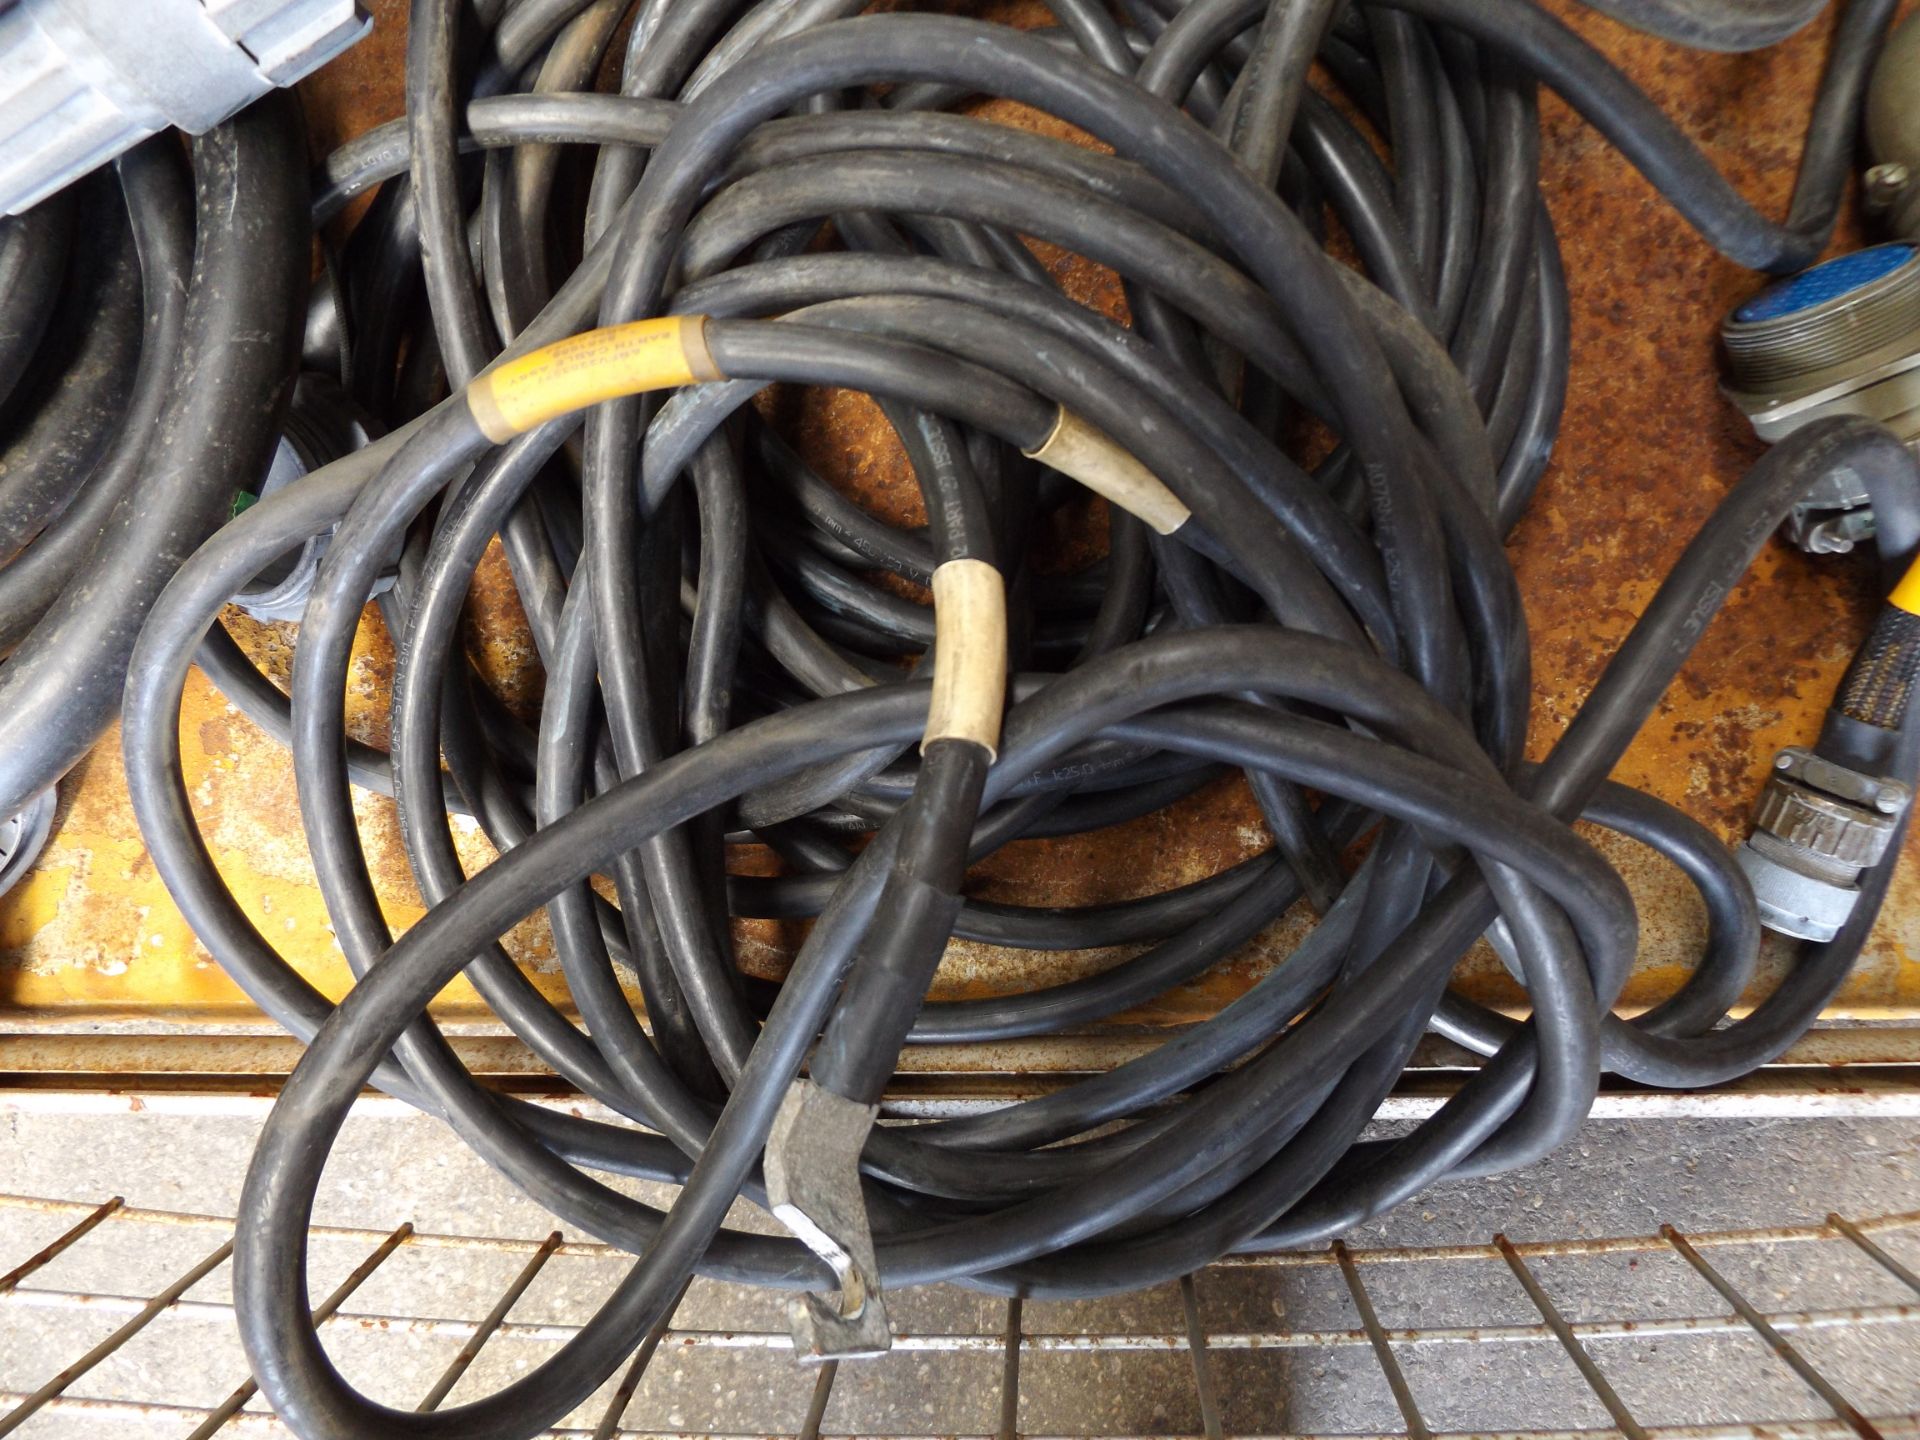 Mixed Stillage of Electrical Cable and Connectors - Image 6 of 8